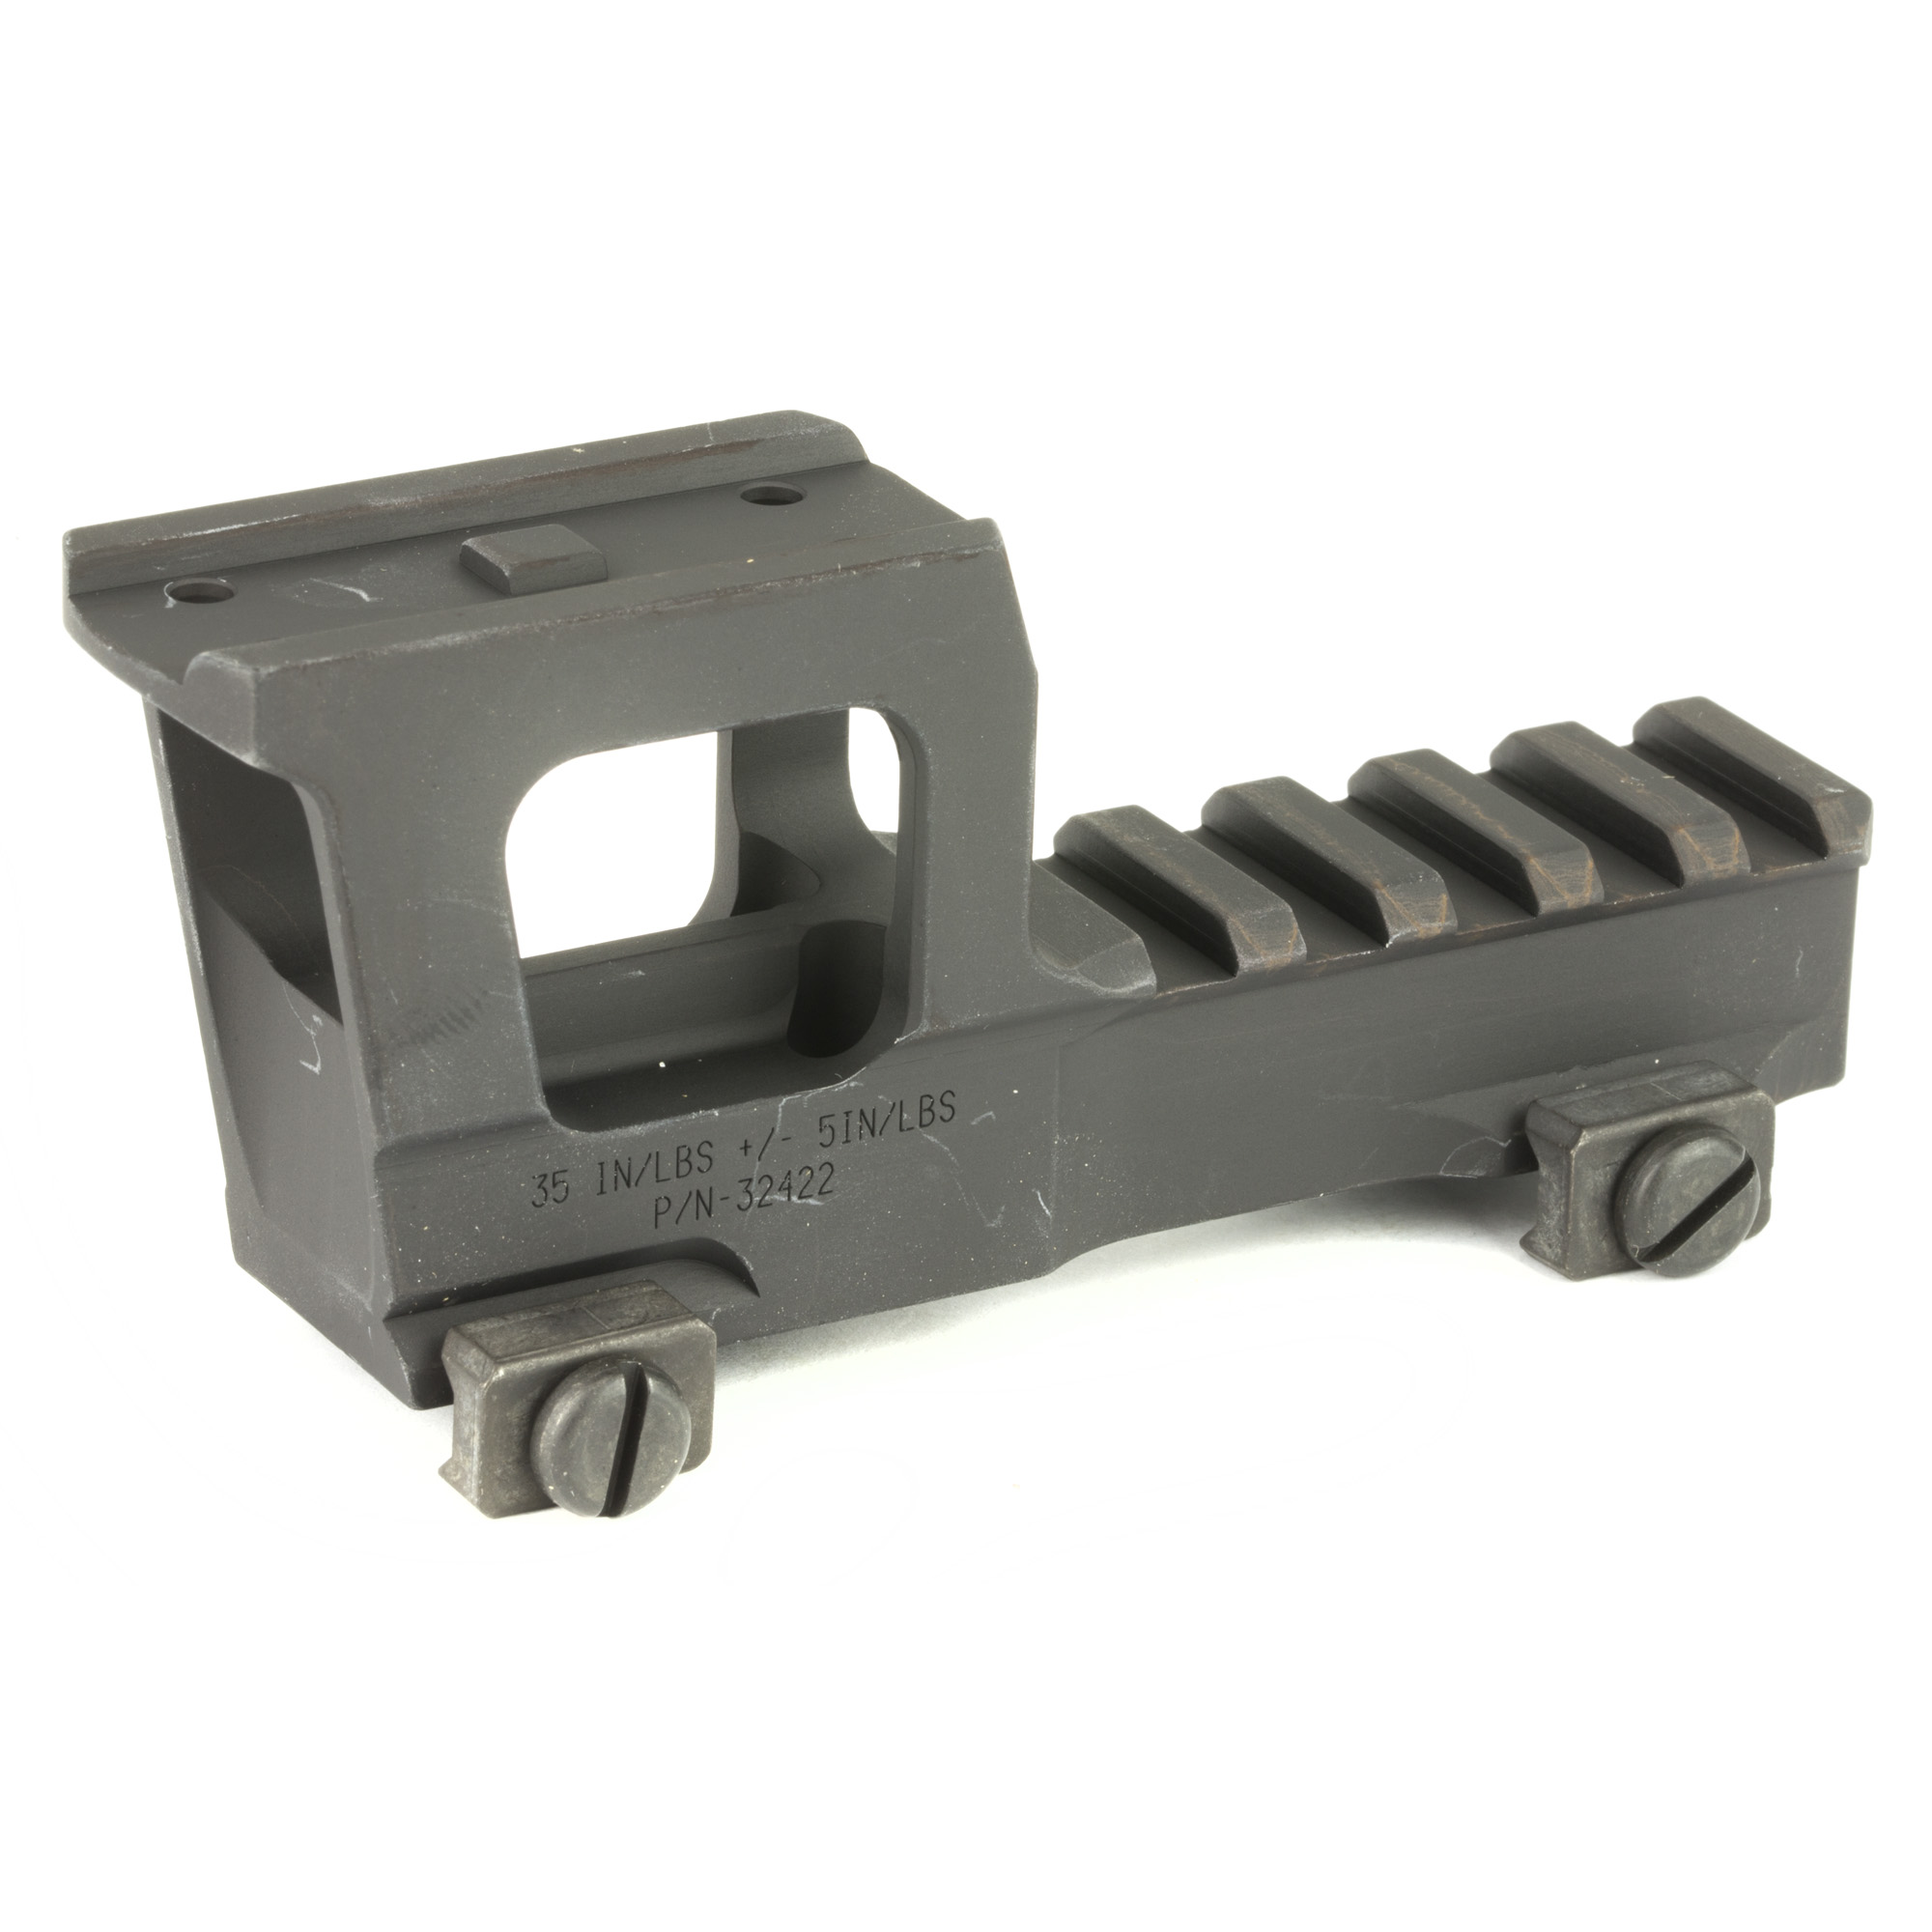 Knight's Armament Aimpoint Micro NVG Mount